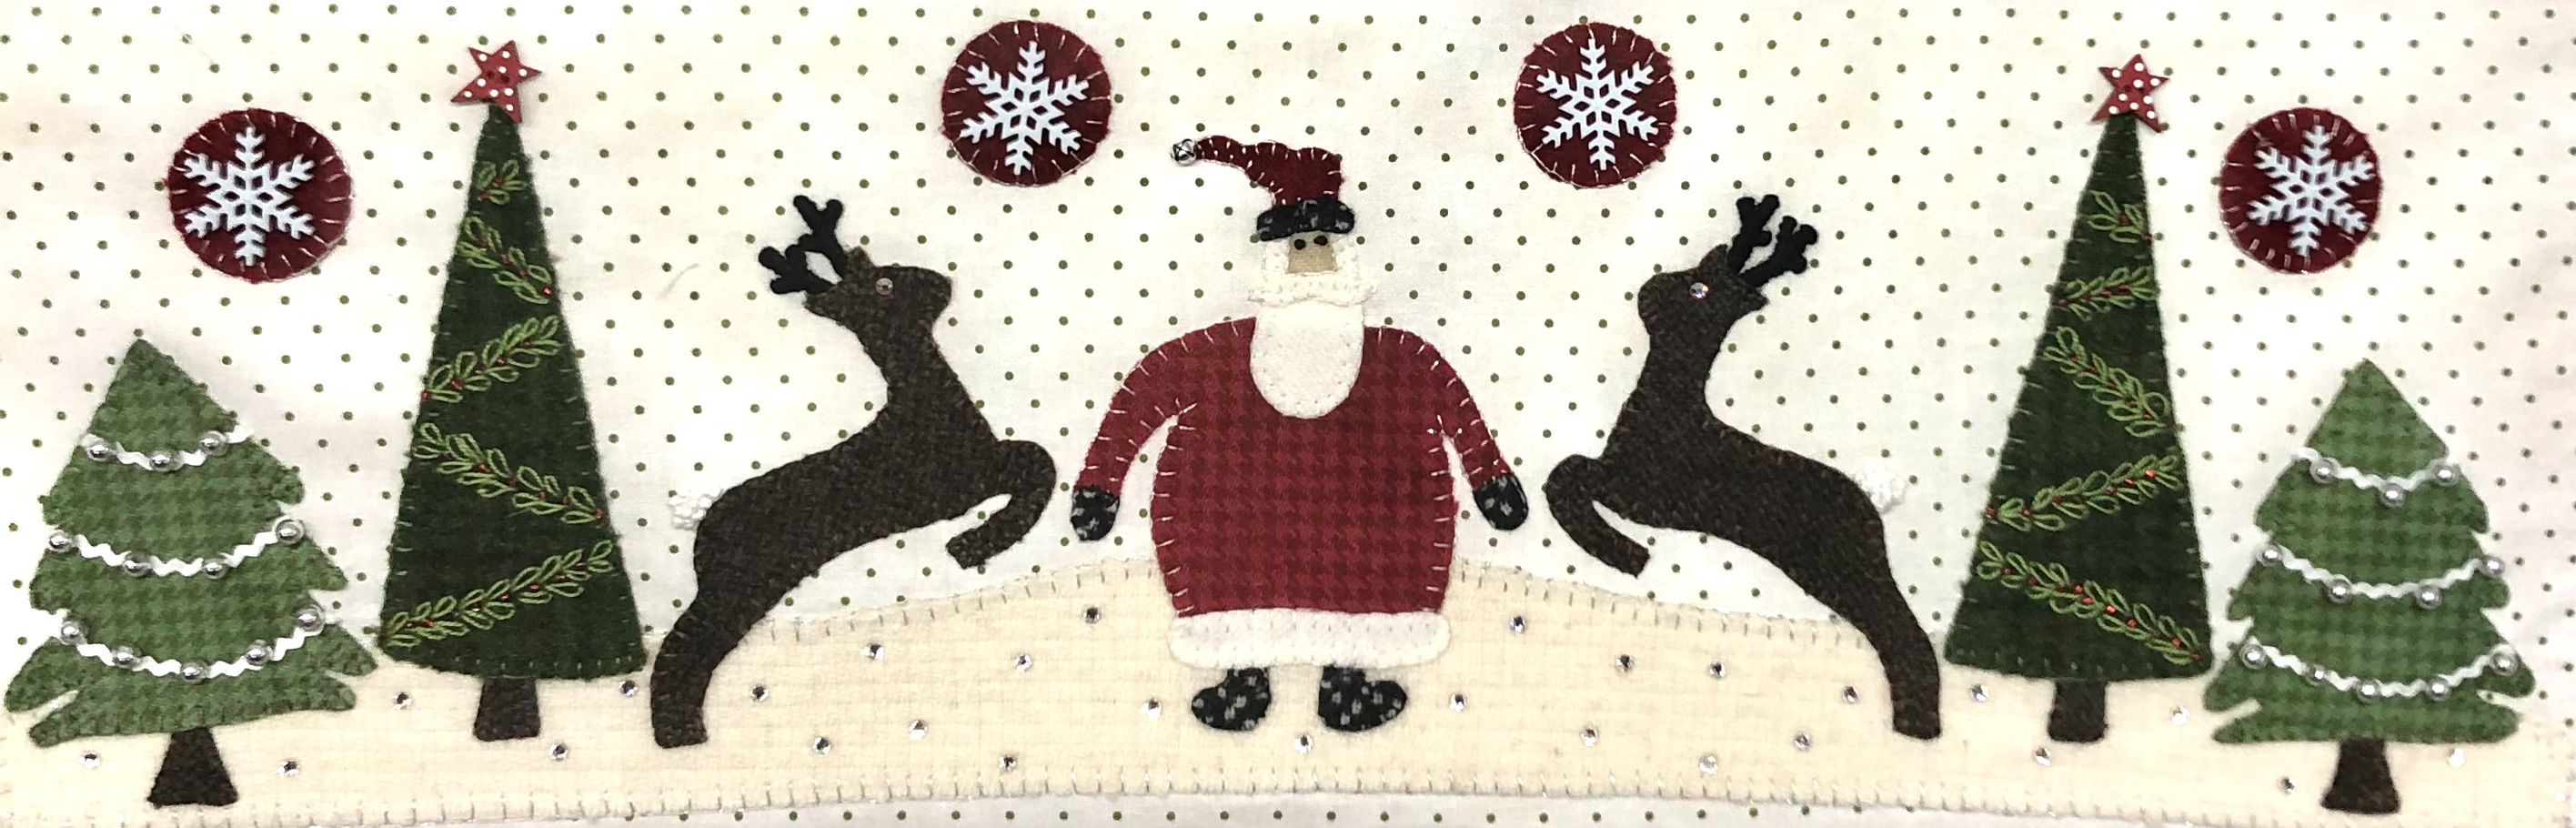 Mary Jane & Friends - The Countdown to the Holidays Ladies Border Block 2 - SANTA'S ARRIVAL KIT WITH PRINTED PATTERN